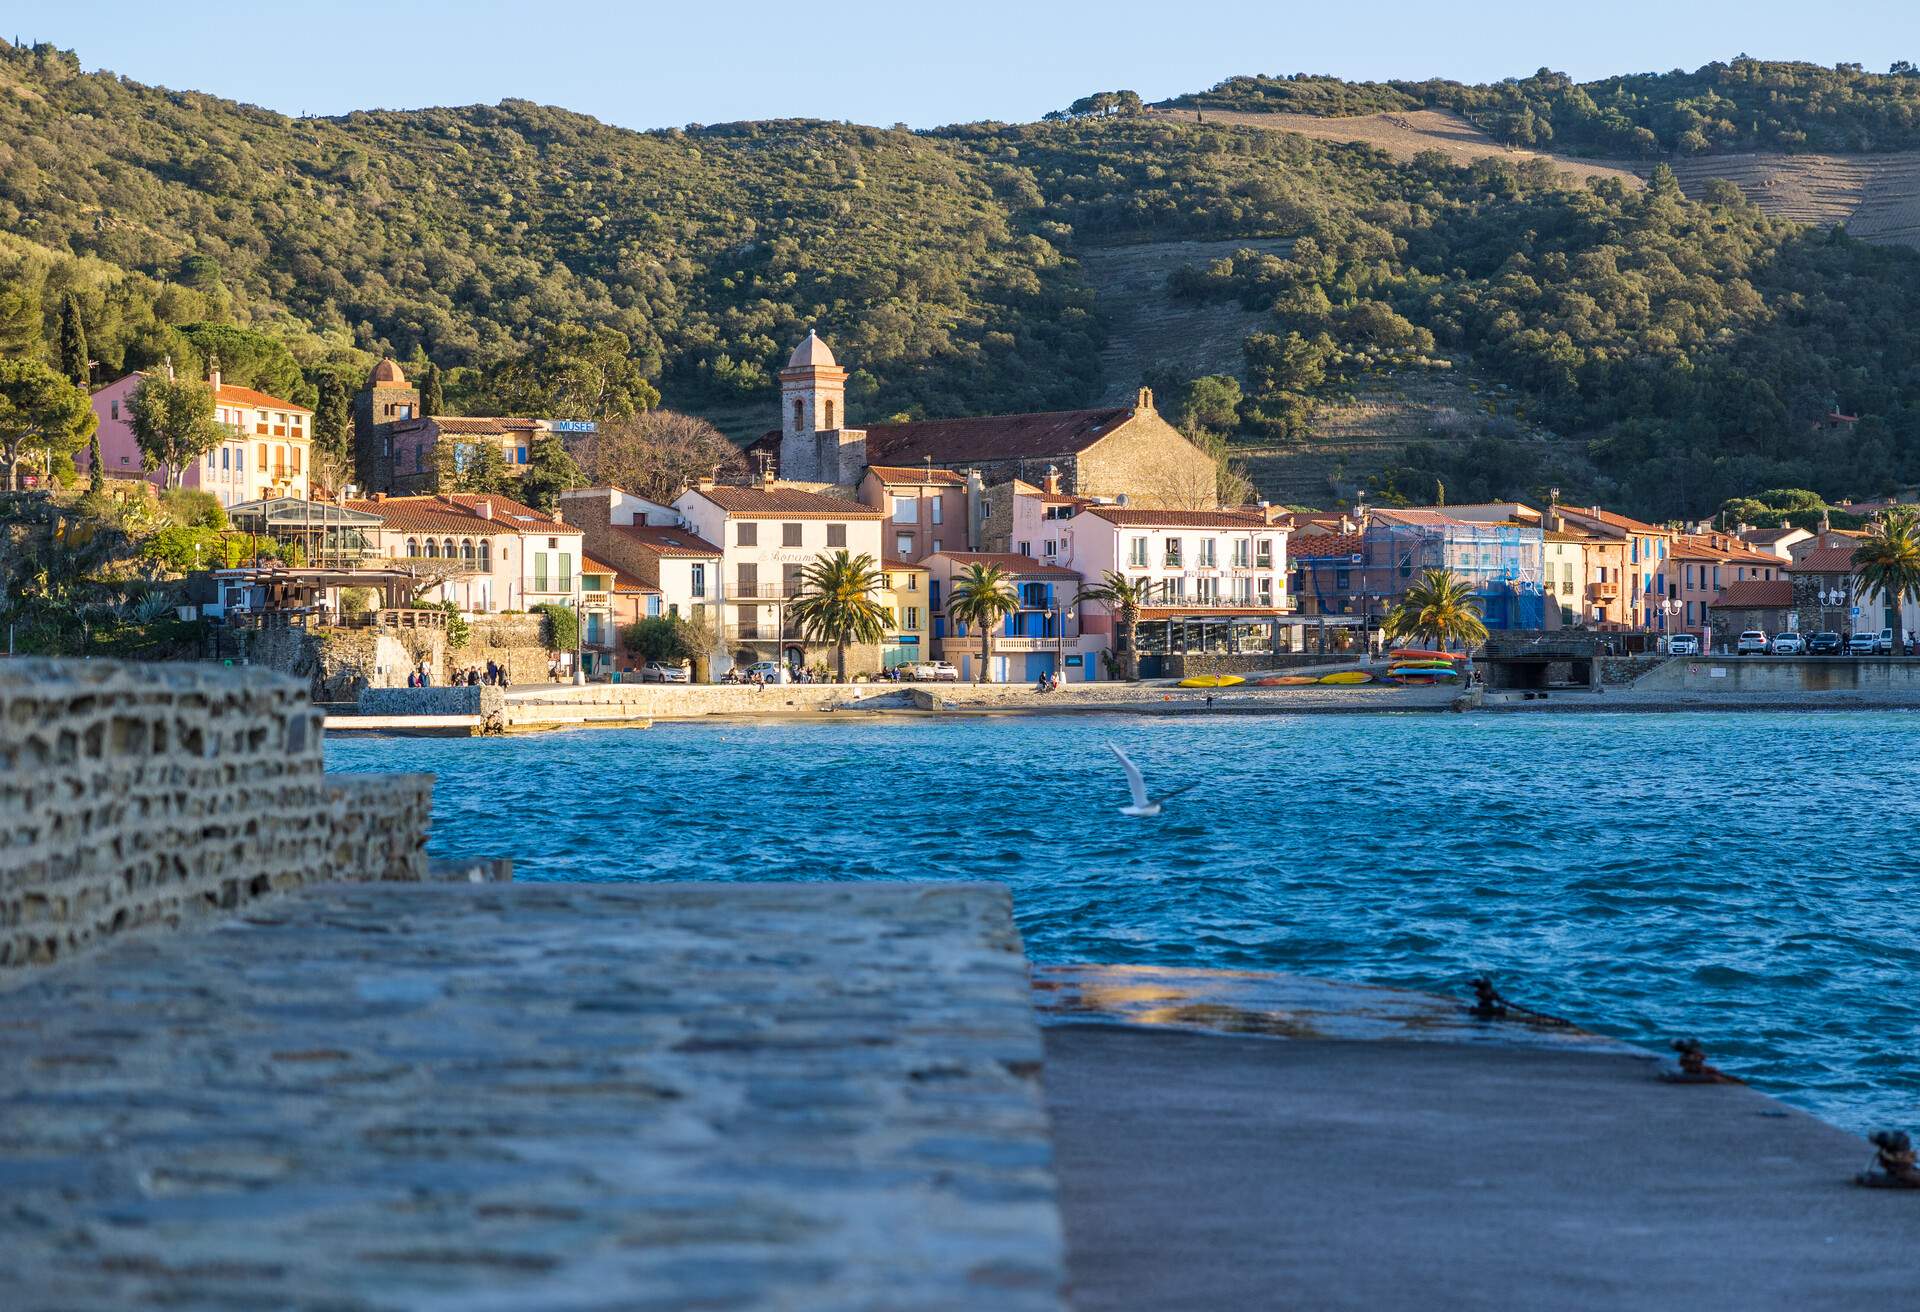 View at sunset on the Port d'Avall beach in Collioure, France